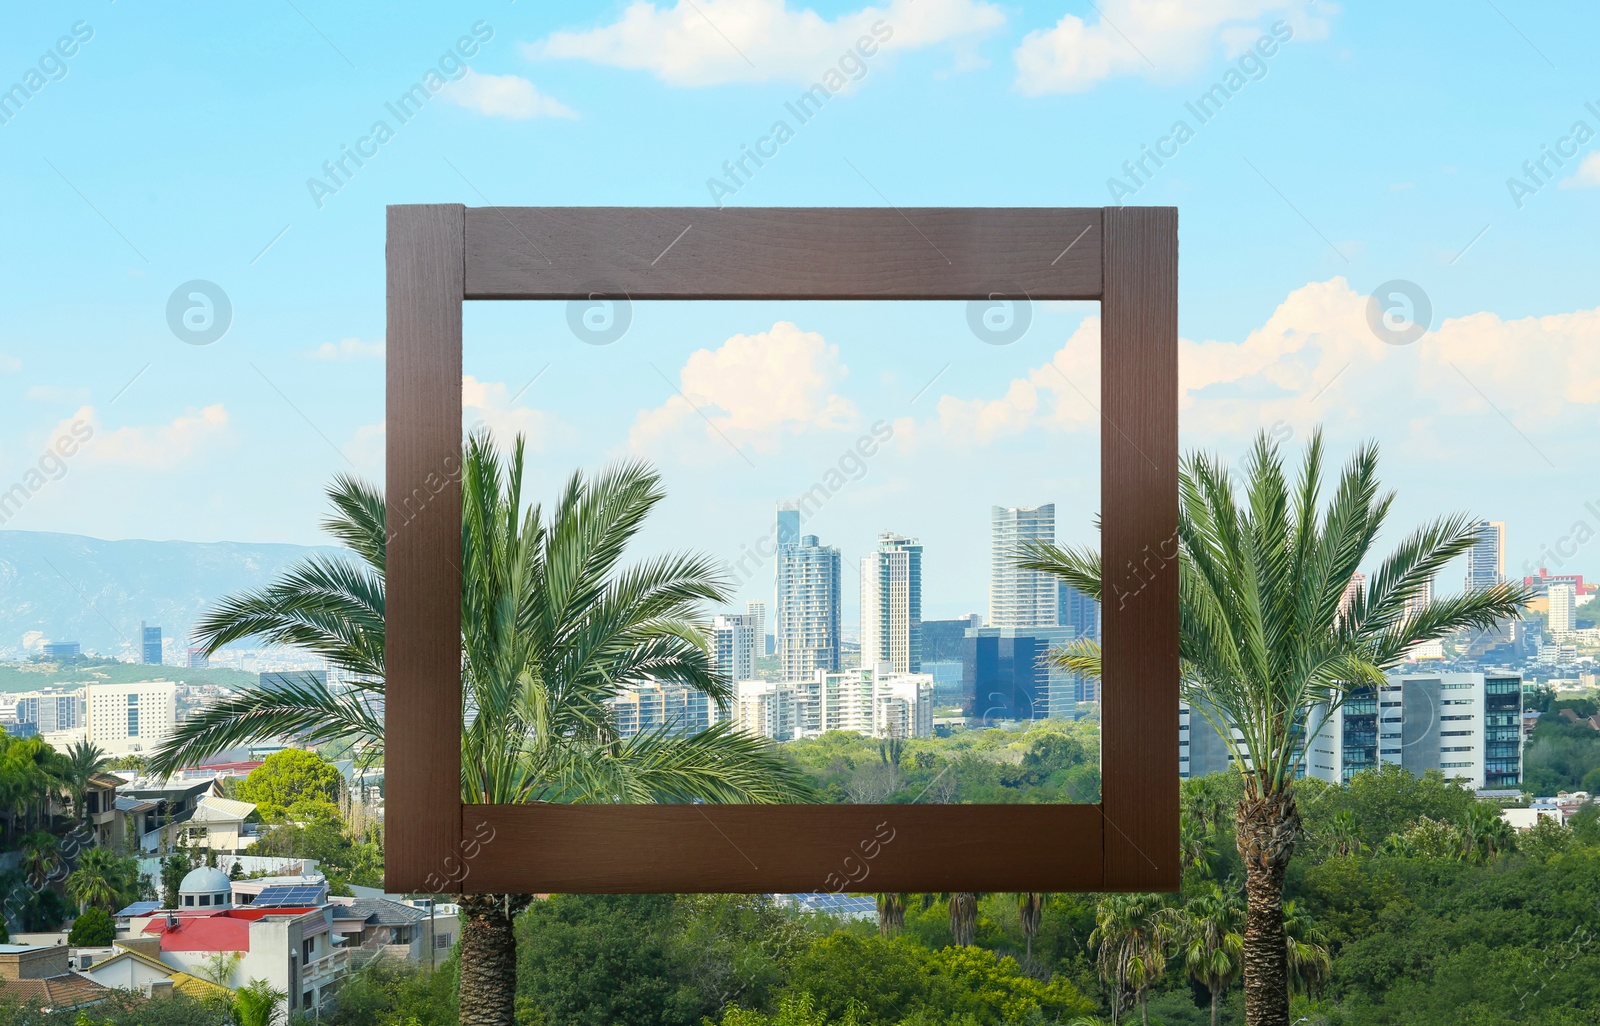 Image of Wooden frame and beautiful city scape under blue sky with clouds